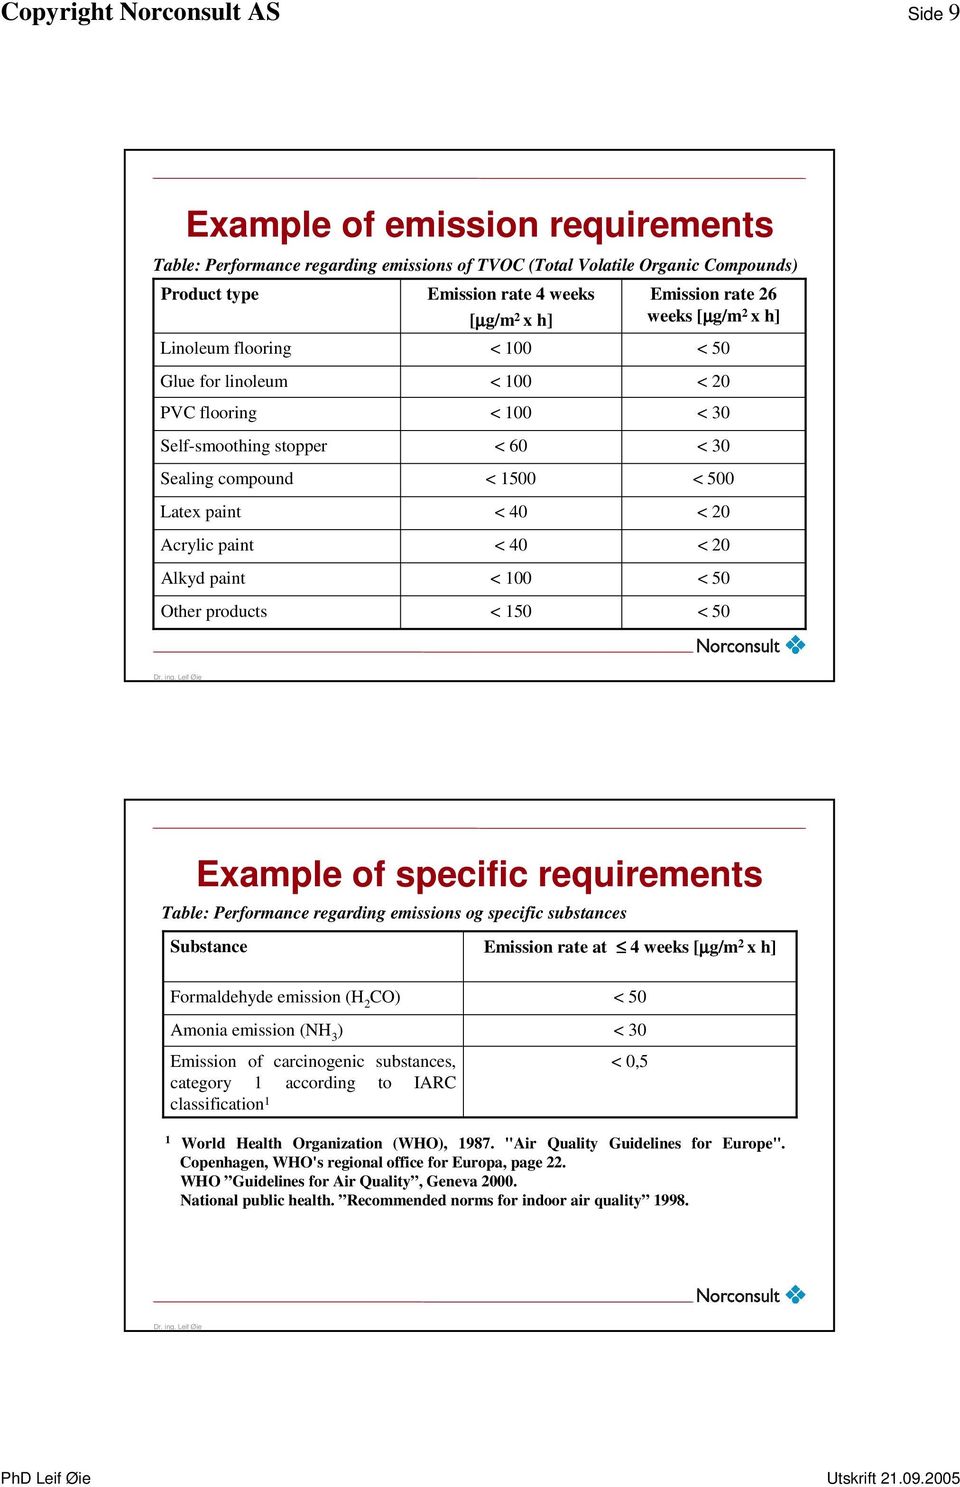 < 100 < 150 < 20 < 30 < 30 < 500 < 20 < 20 < 50 < 50 Example of specific requirements Table: Performance regarding emissions specific substances Substance Emission rate at 4 weeks [µg/m 2 x h]